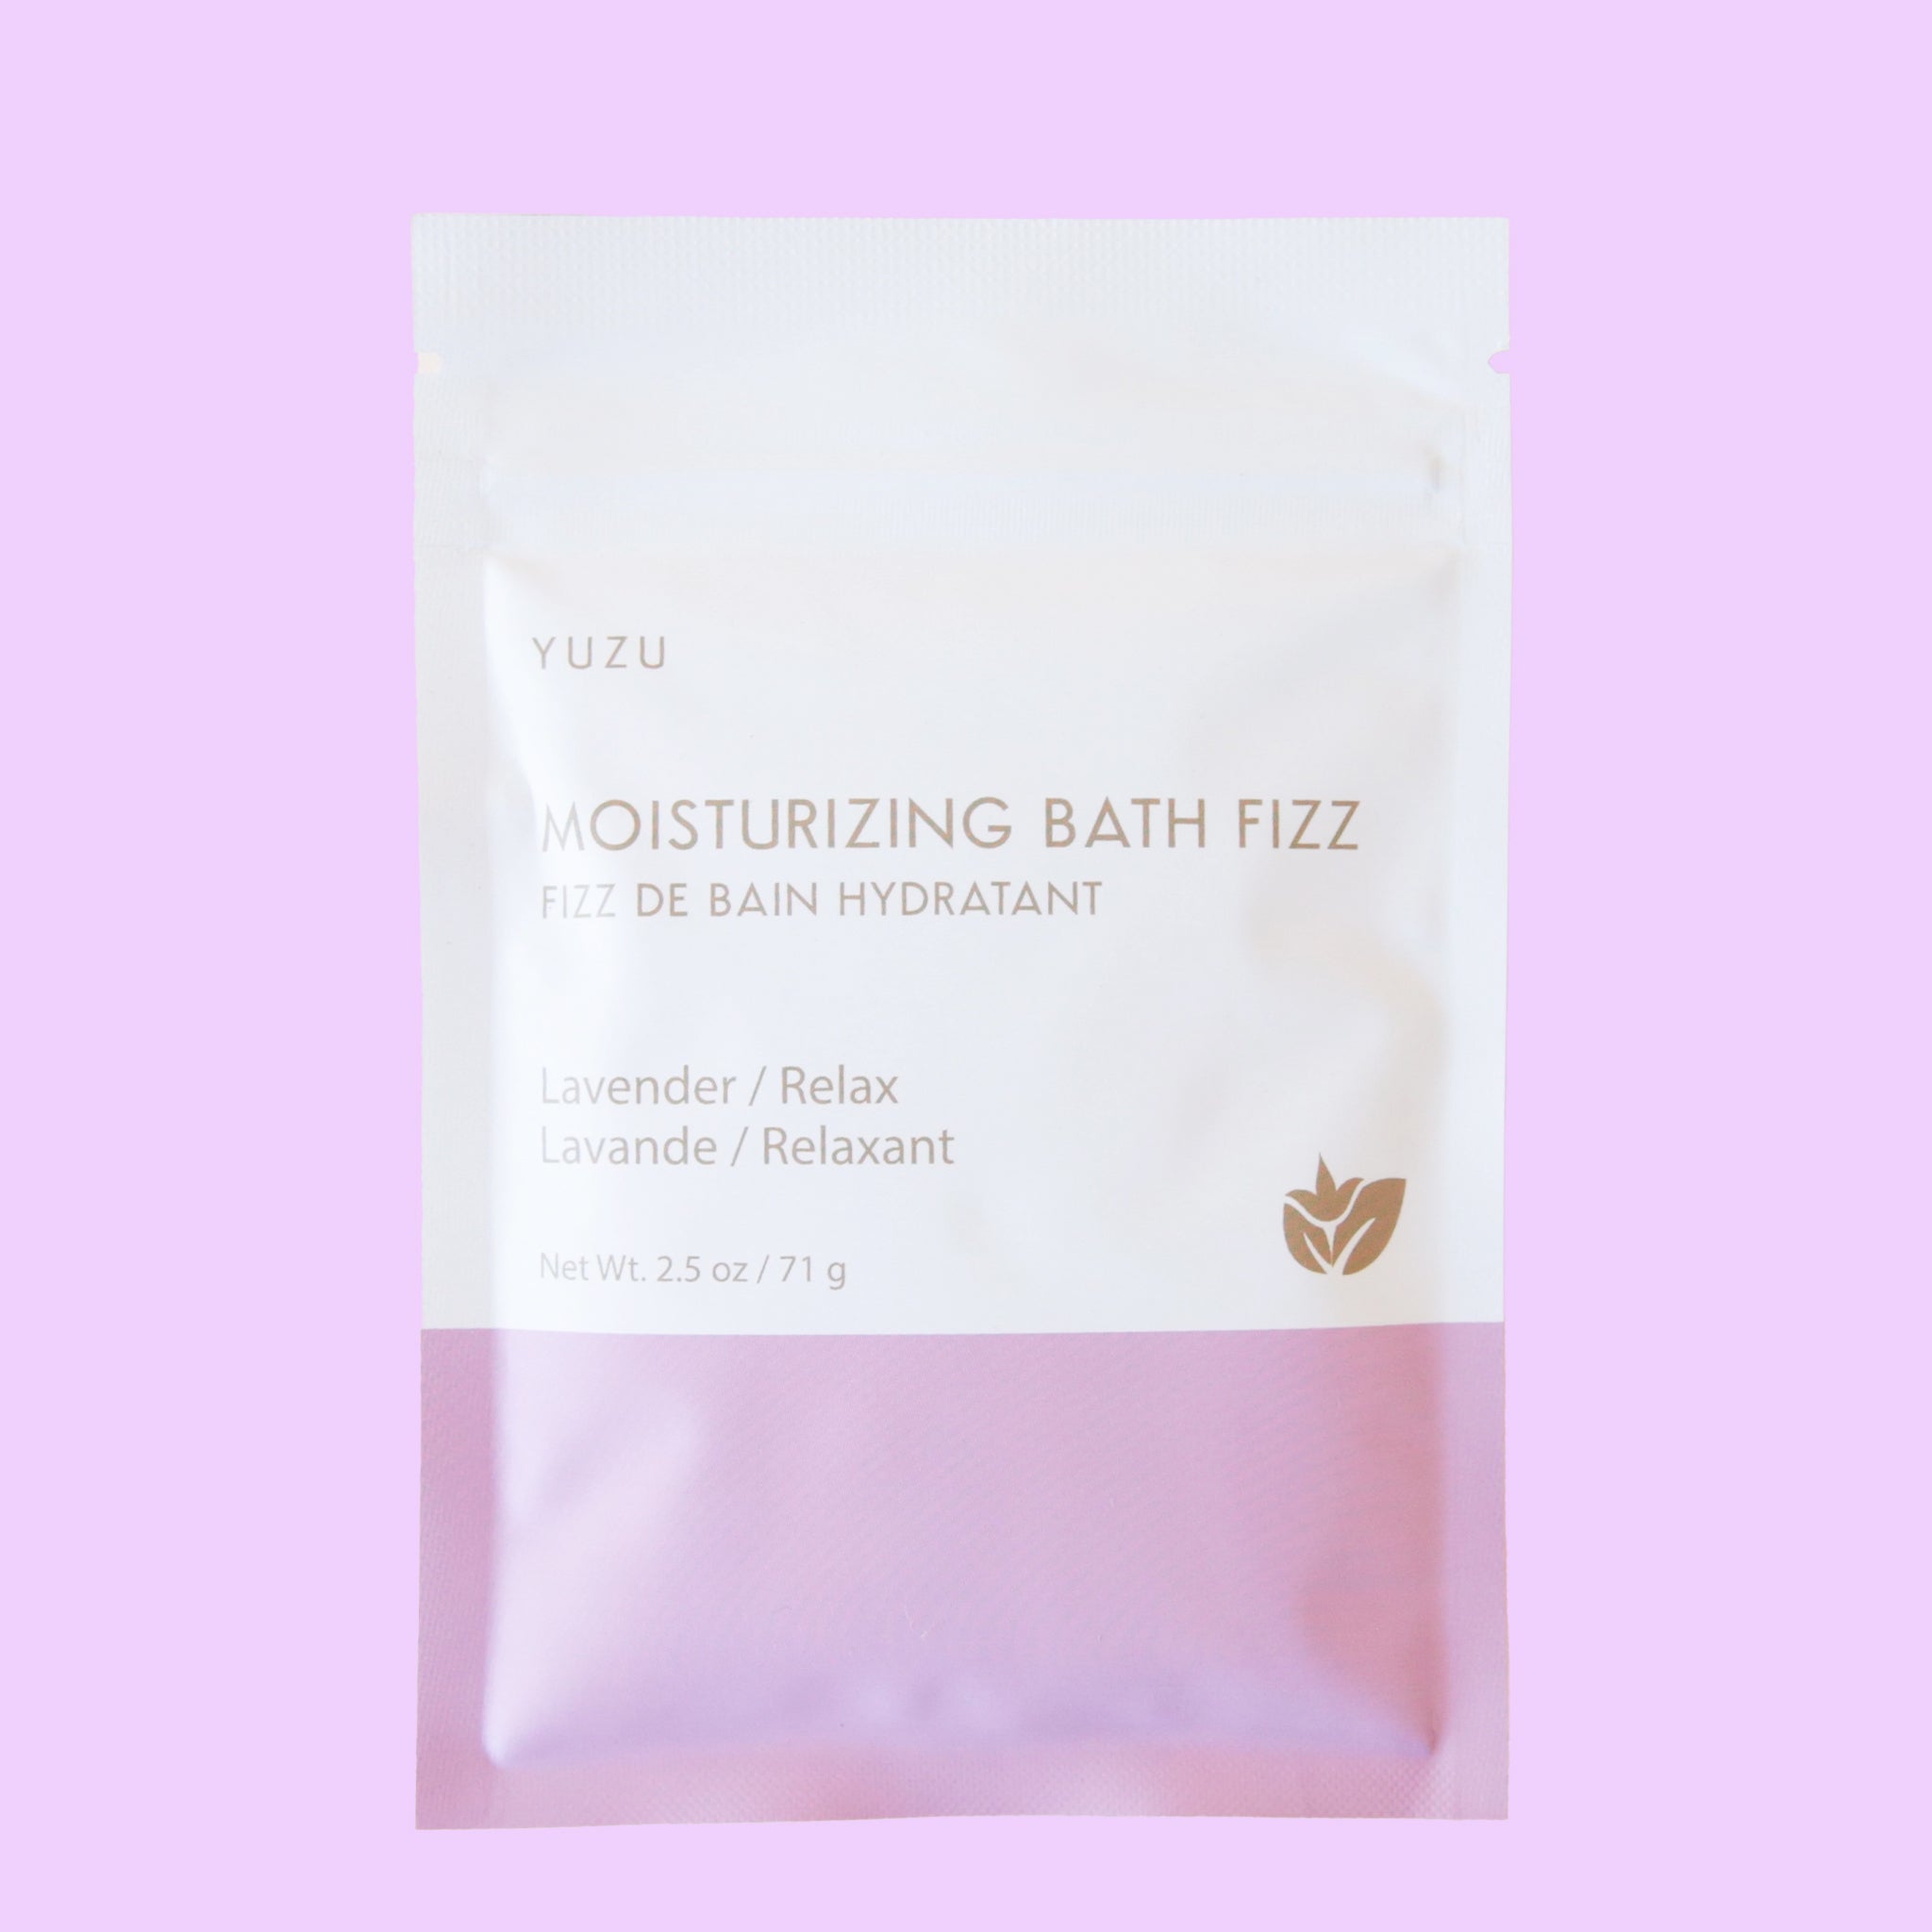 A packet of bath salts with the bottom half a light pink color and the top half white along with text on the front that reads, &quot;Moisturizing Bath Fizz, Lavender / Relax&quot;.